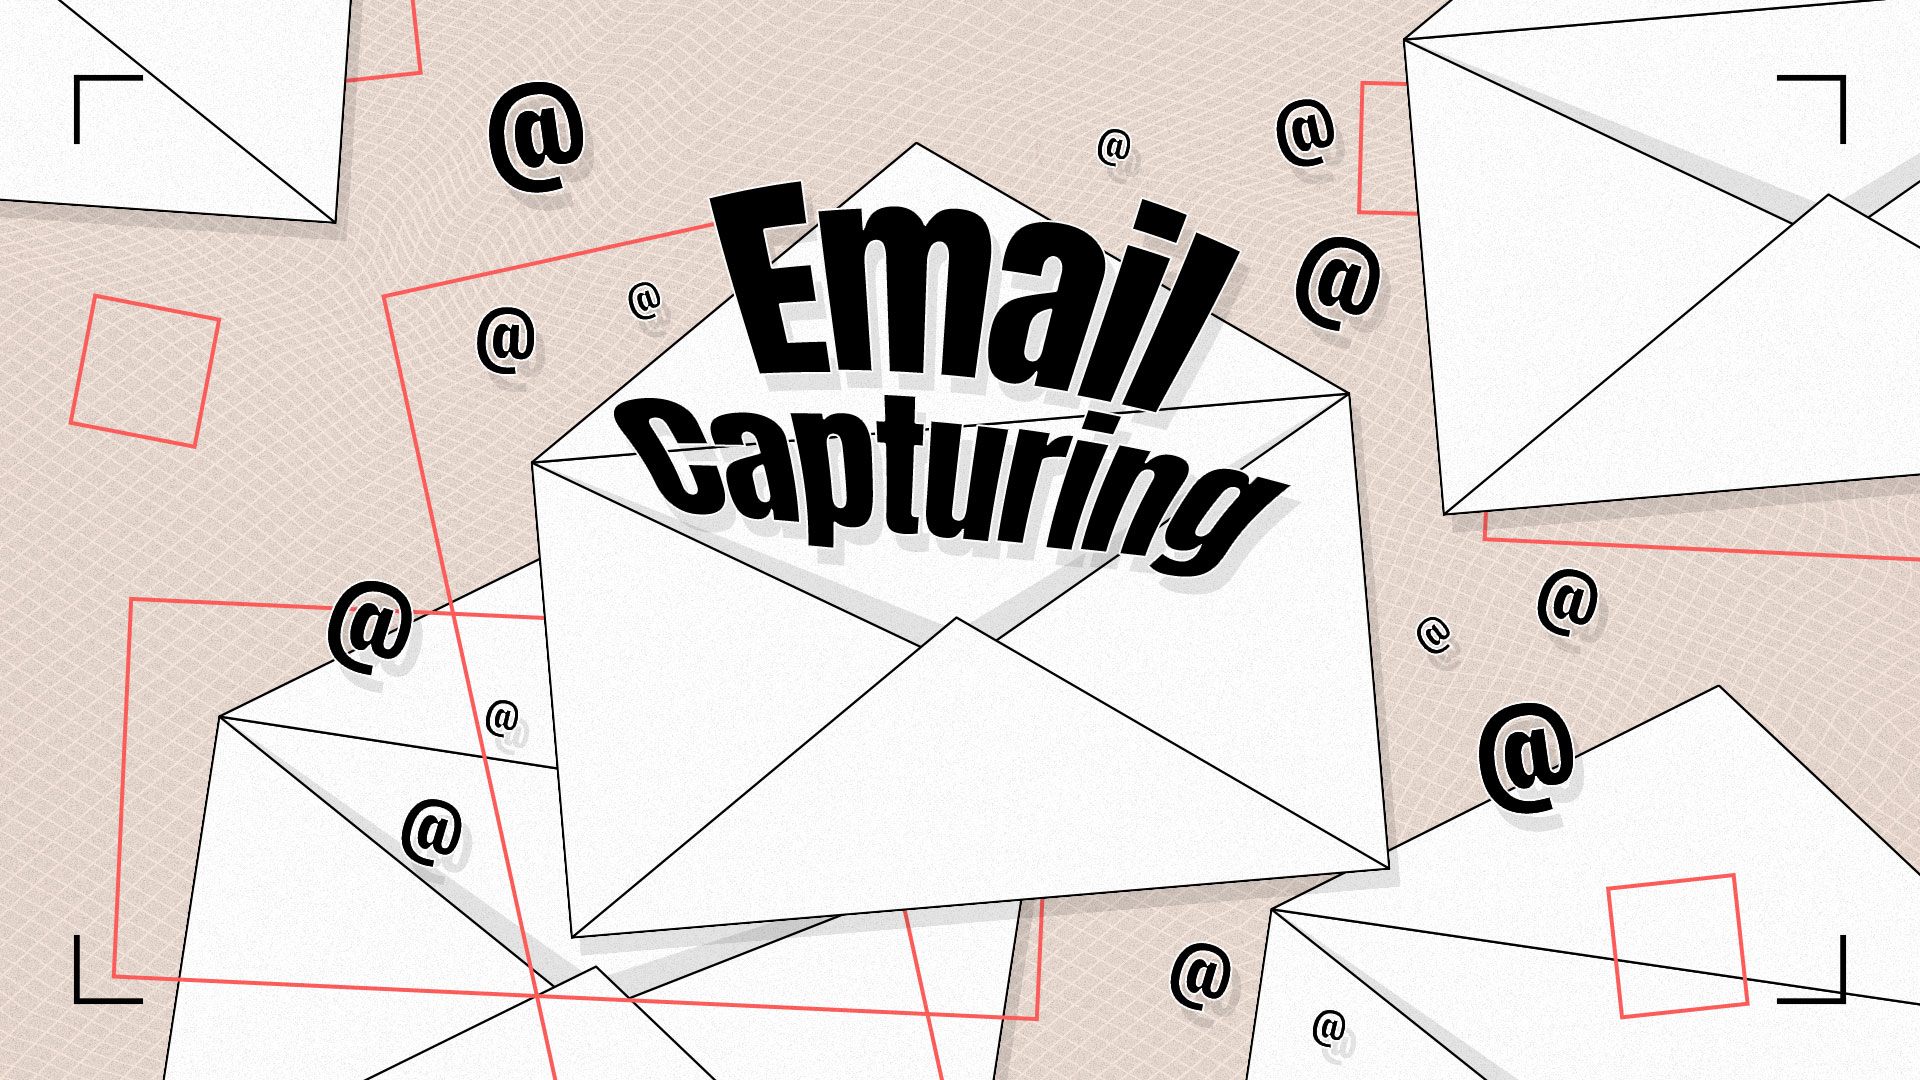 Email Capturing: Tools, Examples, Benefits & Best Practices